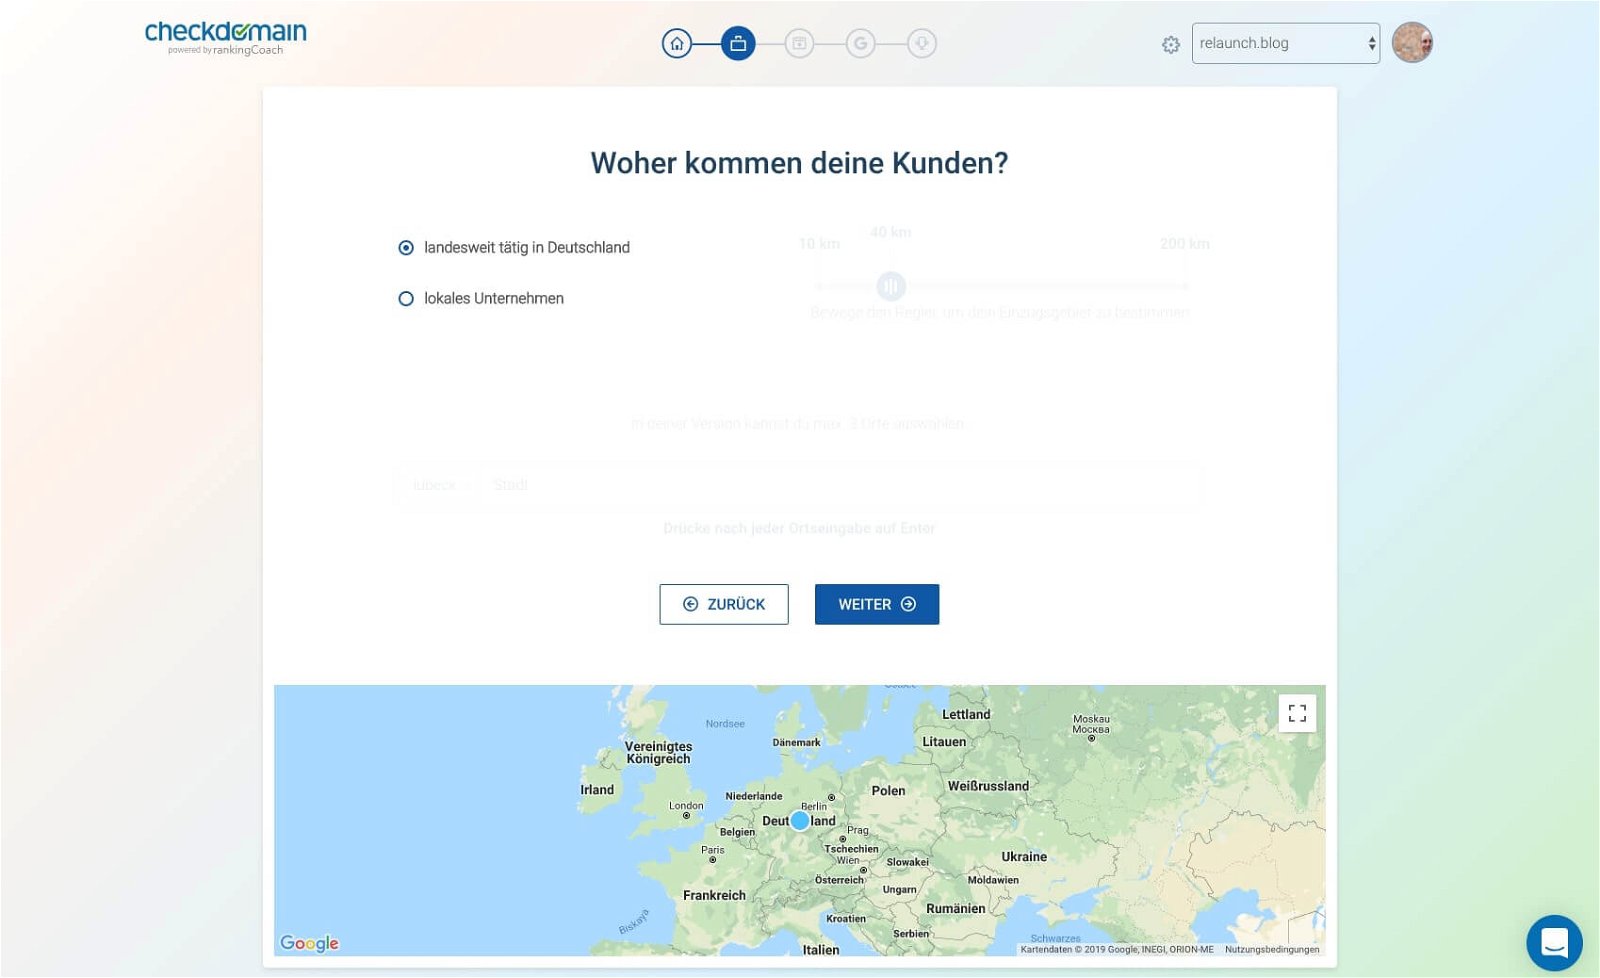 Location analysis of your customers in rankingCoach